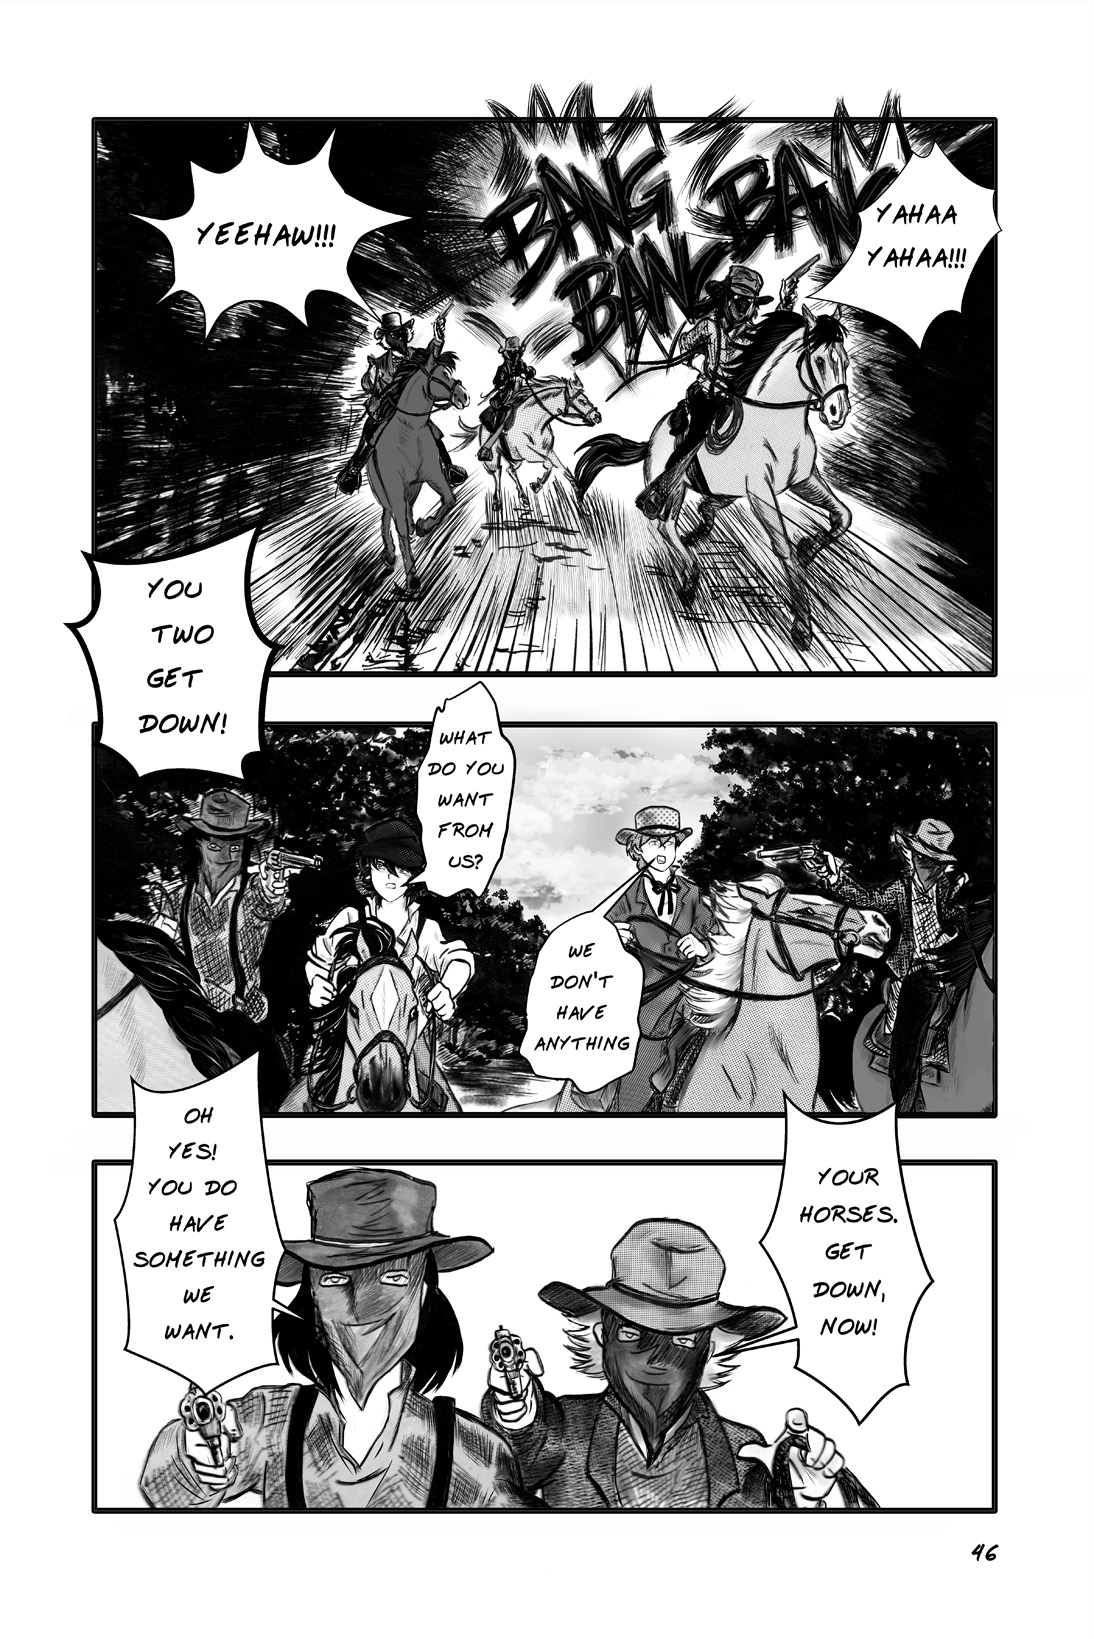 page46-Legends of the West